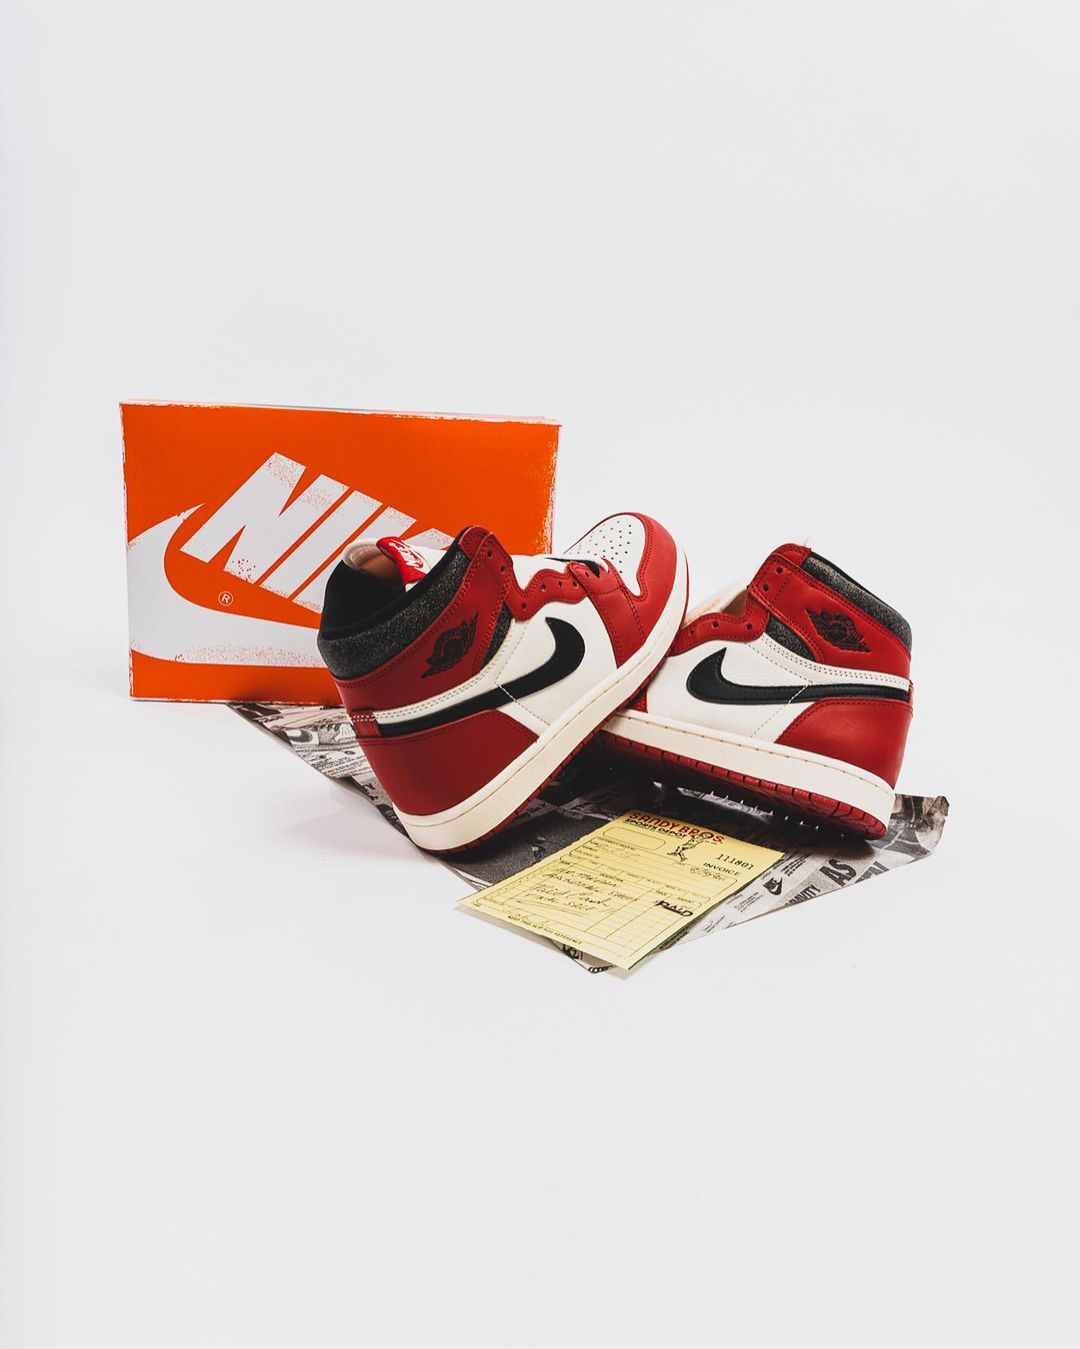 nike-air-jordan-1-lost-and-found-chicago-dz5485-612-release-20221119